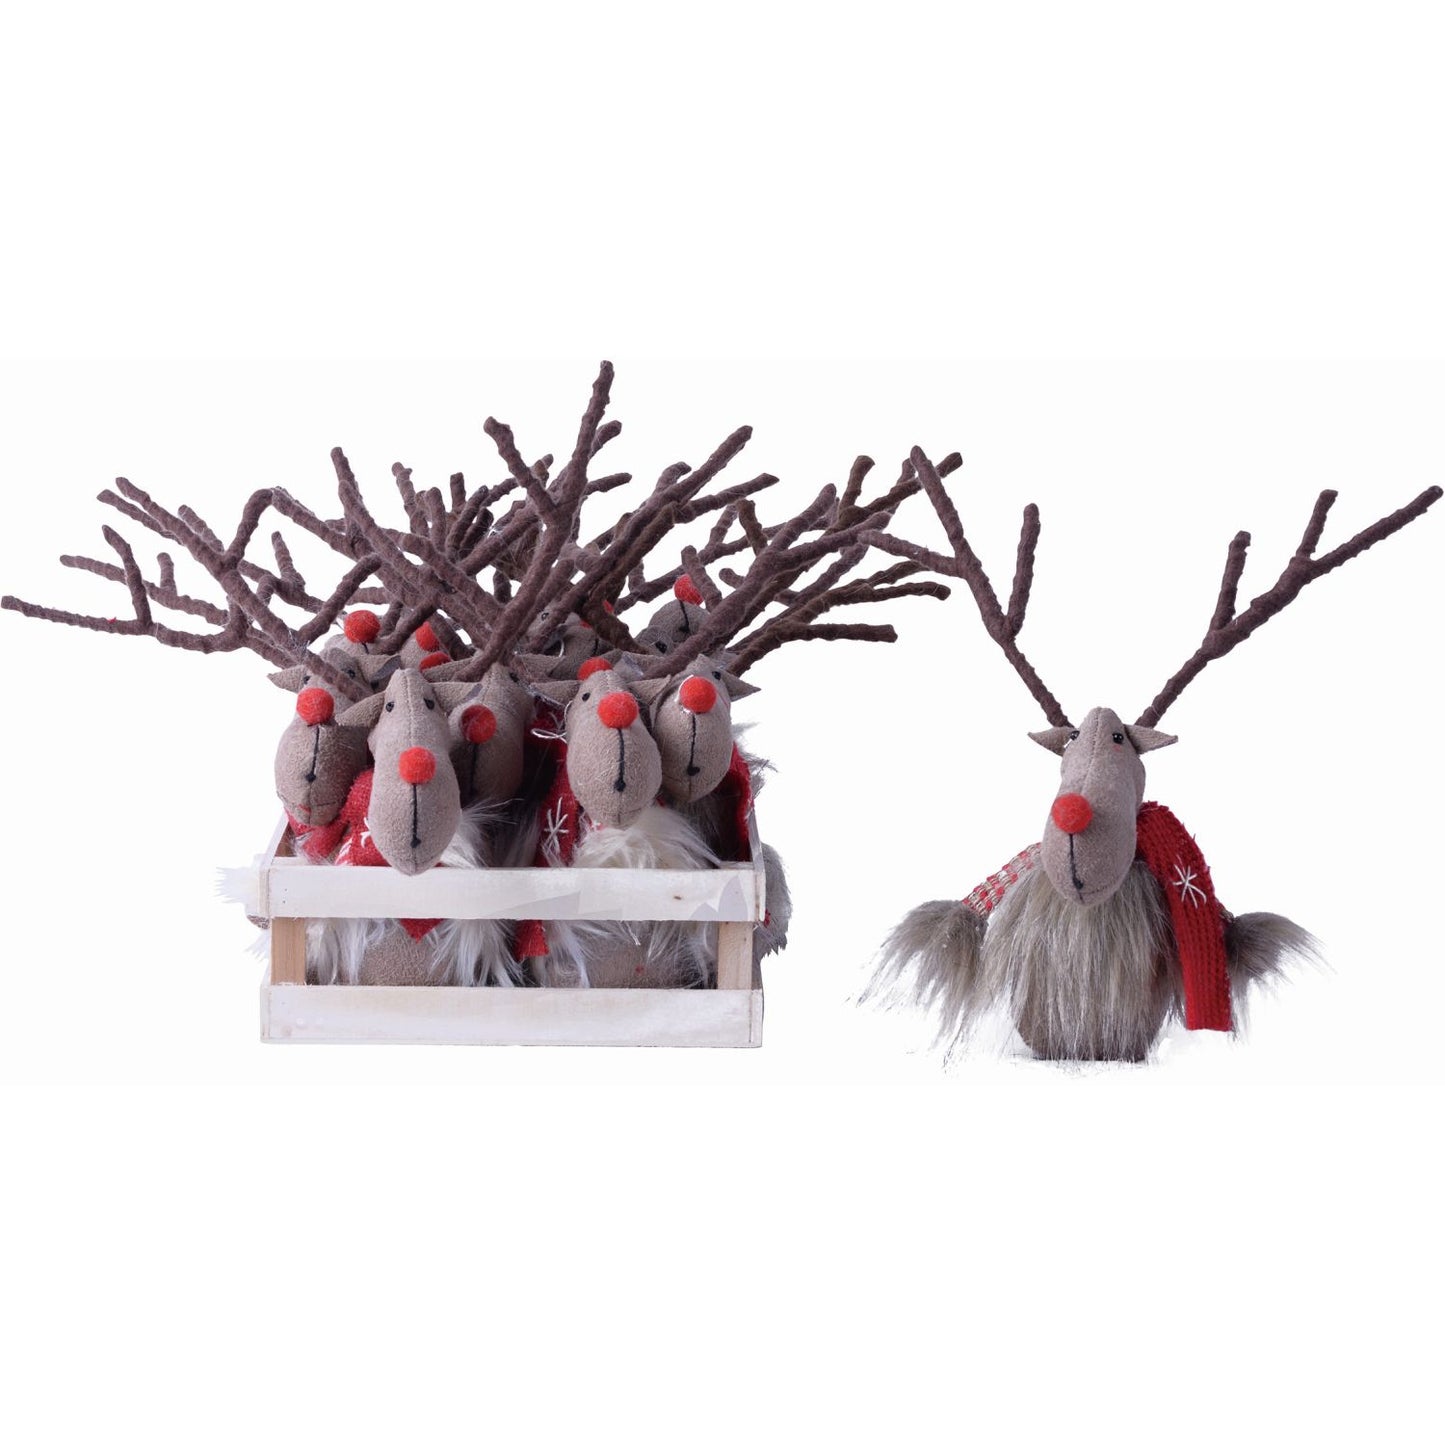 Transpac Plush Reindeer Ornament In Wood Tray, Set Of 12